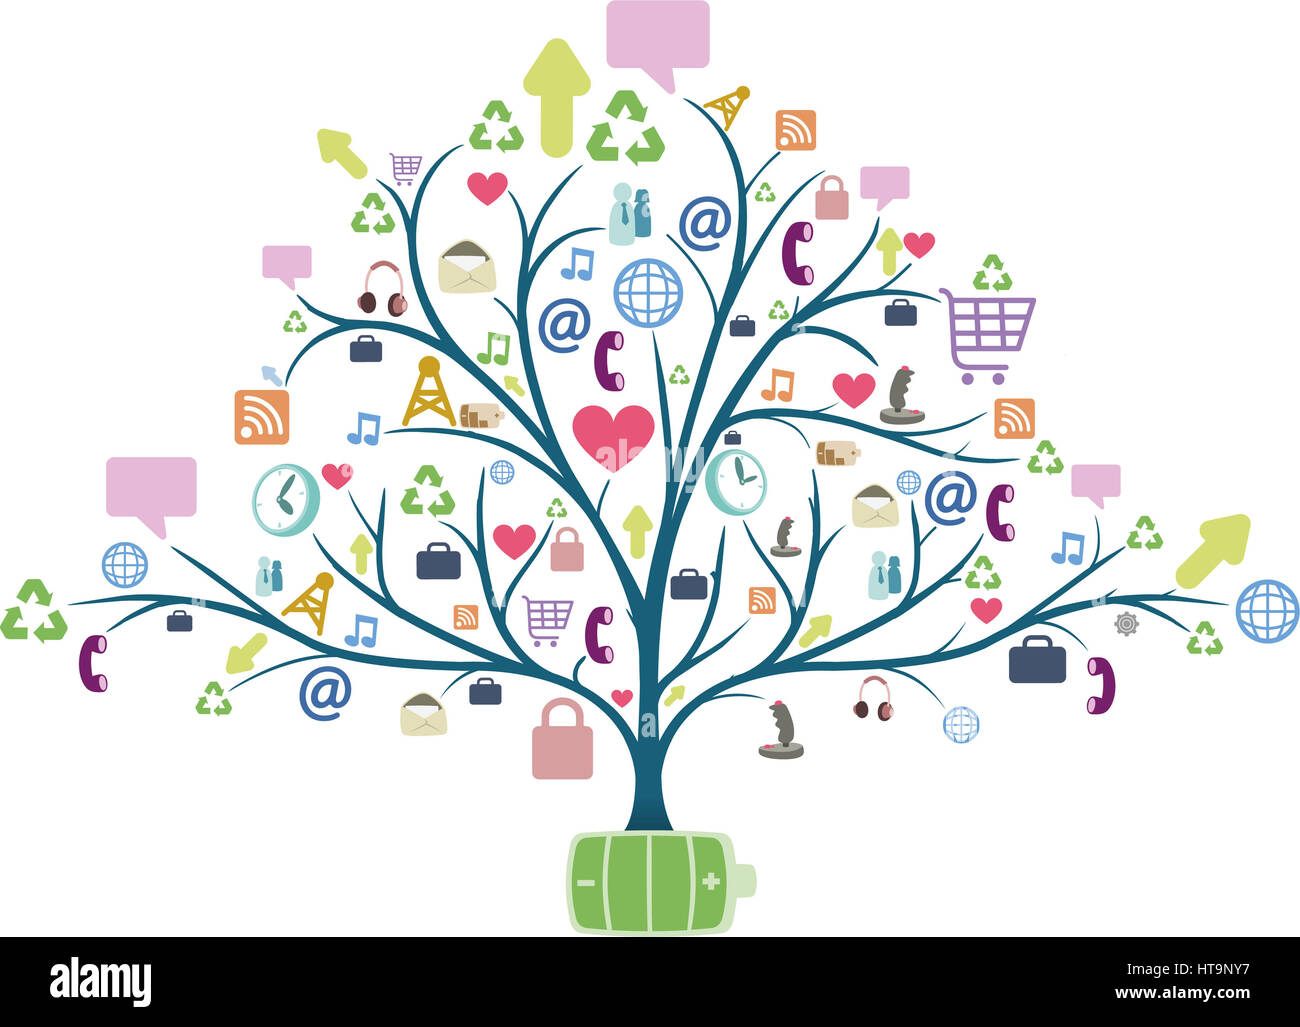 tree-with-communication-icons-vector-illustration-stock-photo-alamy